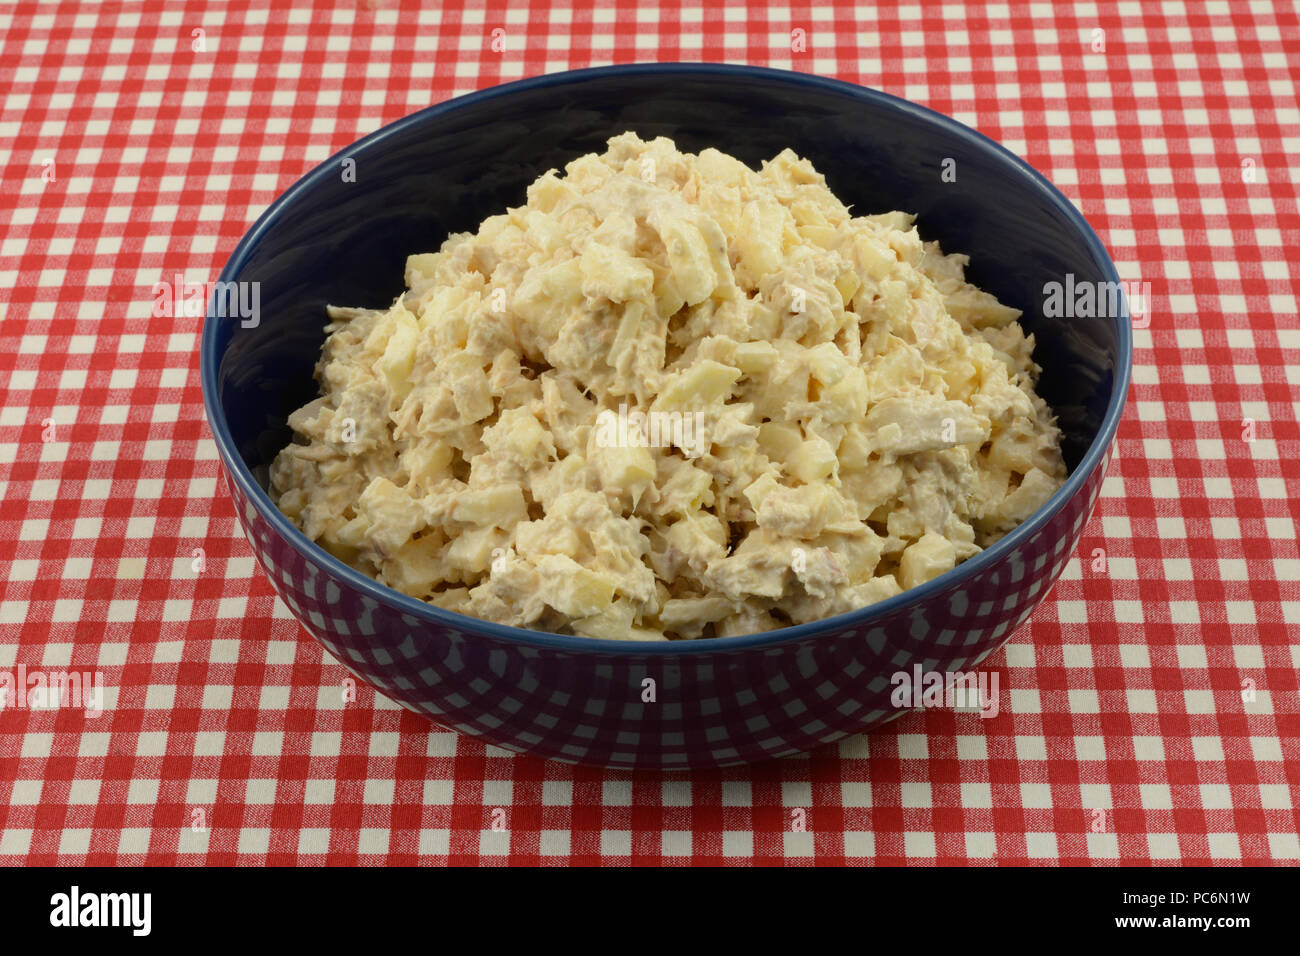 Albacore tuna fish salad made with chopped apple in blue serving bowl on red checkered tablecloth Stock Photo